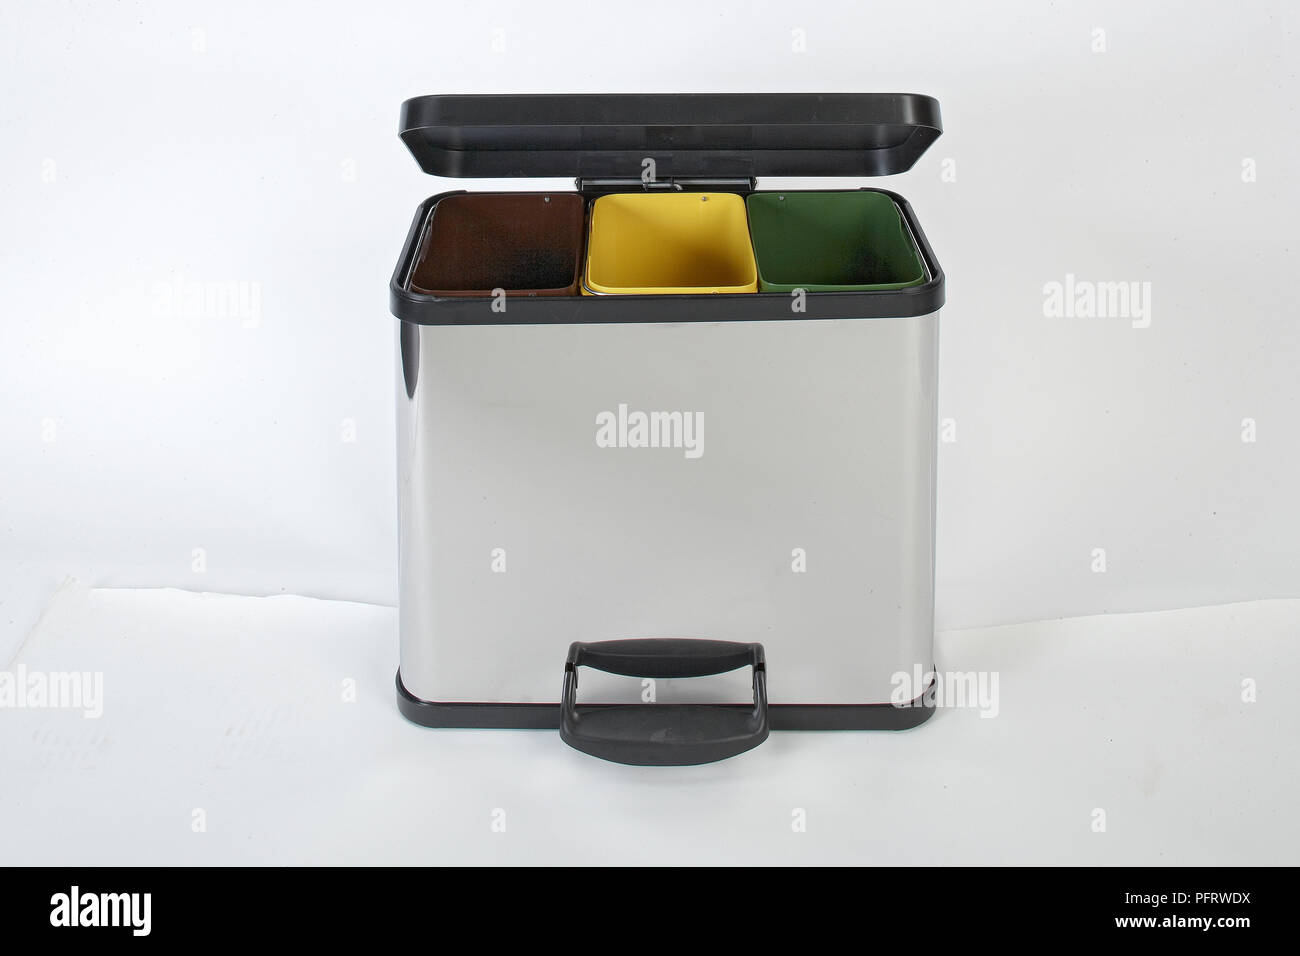 Bin with different compartments for recycling Stock Photo